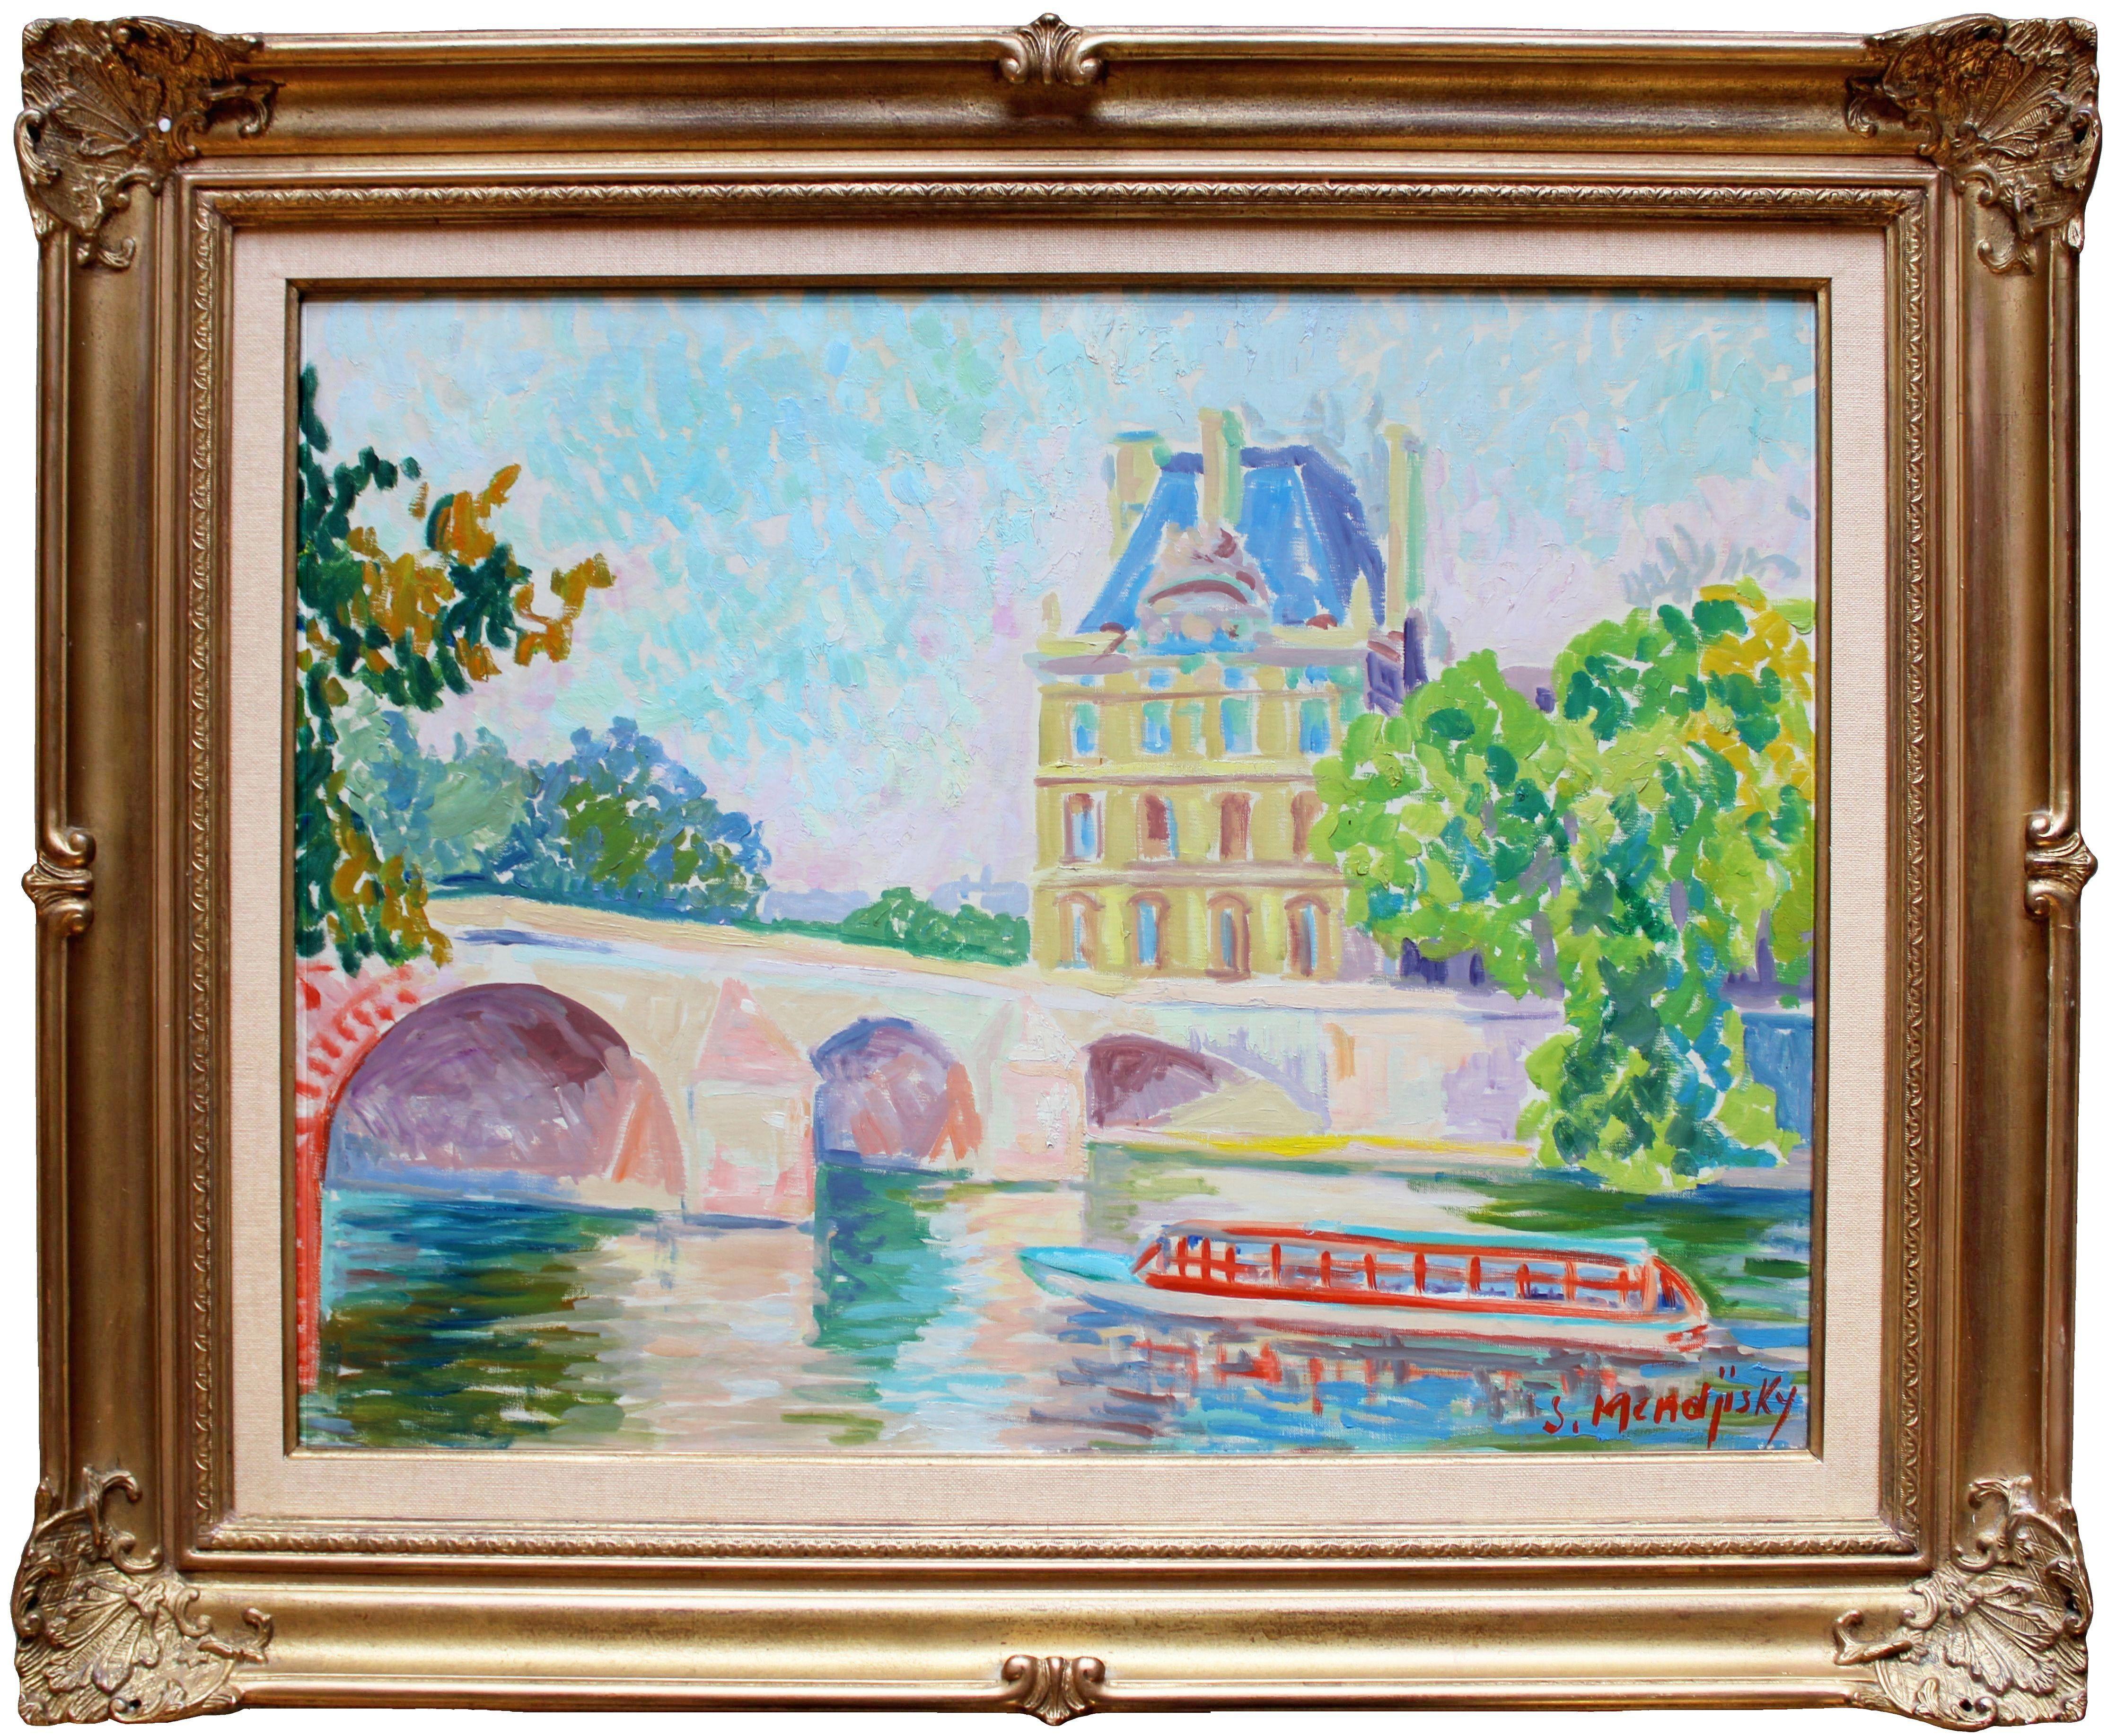 The Seine at the Louvre. Oil on canvas, 50 x 65 cm - Painting by Serge Mendjisky